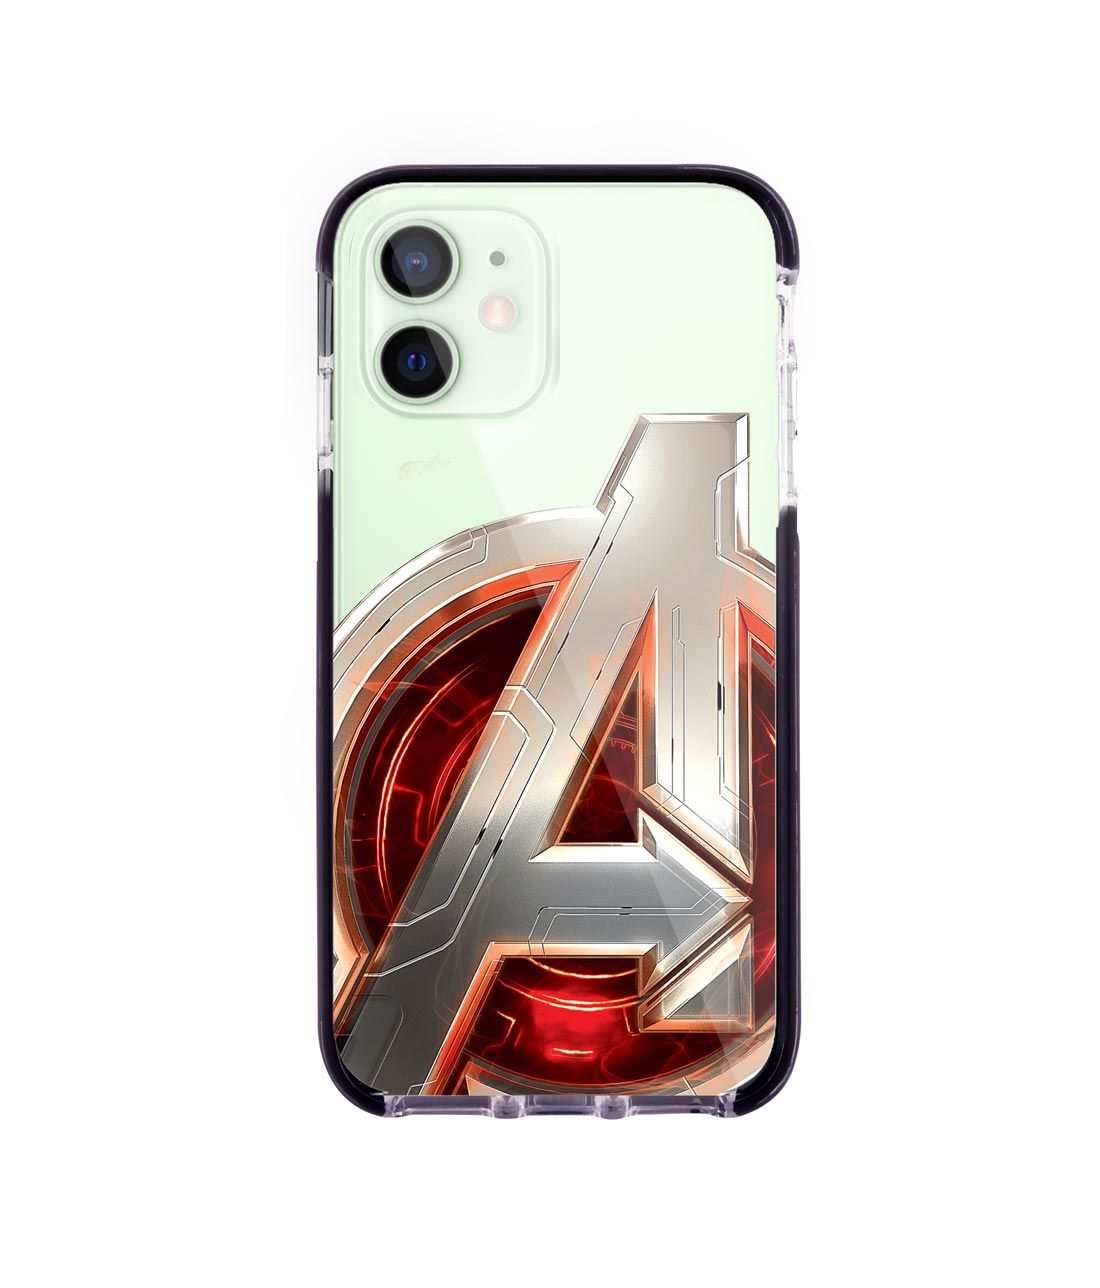 Avengers Version 2 - Extreme Case for iPhone 12 Mini